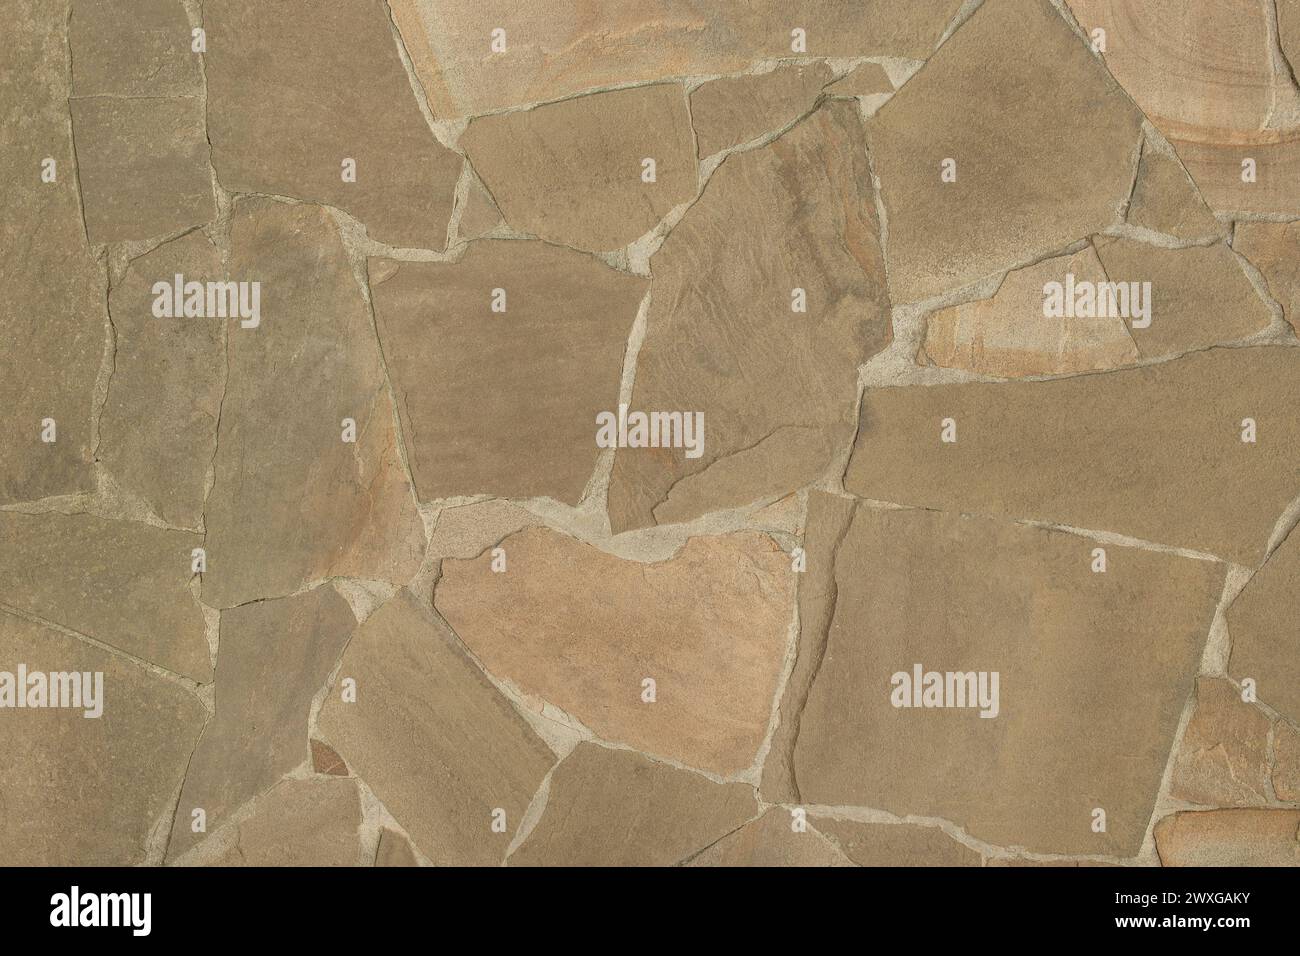 Stone Brown Floor Texture Abstract Pattern Background Surface Wall Tile Mosaic Dirty Old. Stock Photo